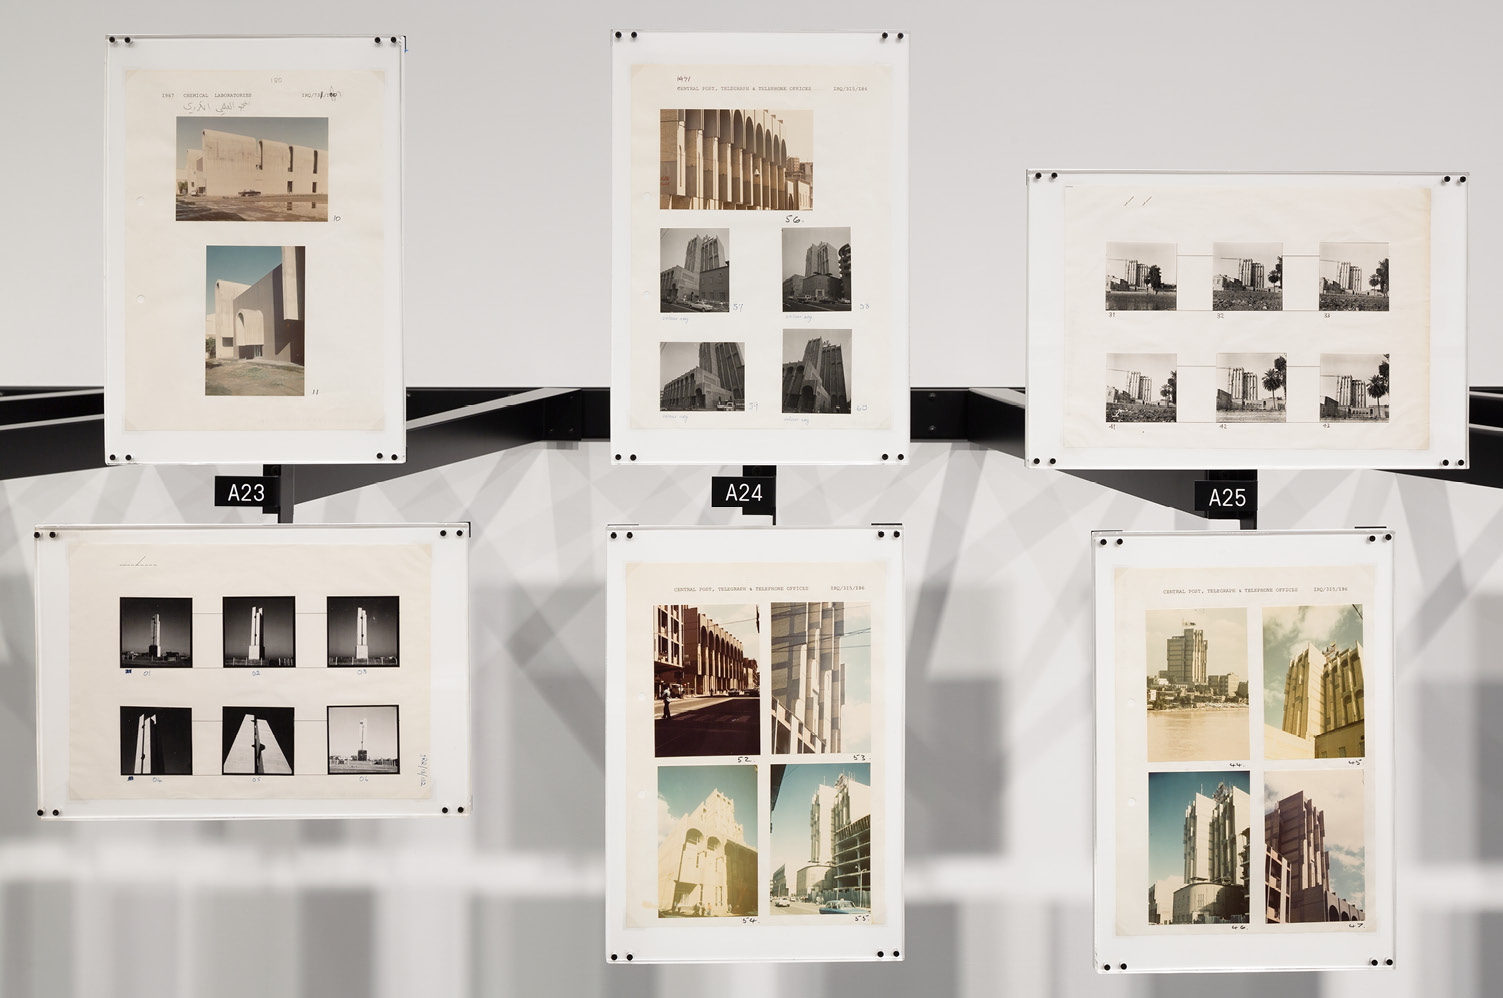 Every Building in Baghdad: The Rifat Chadirji Archives at the Arab Image Foundation - MTWTF